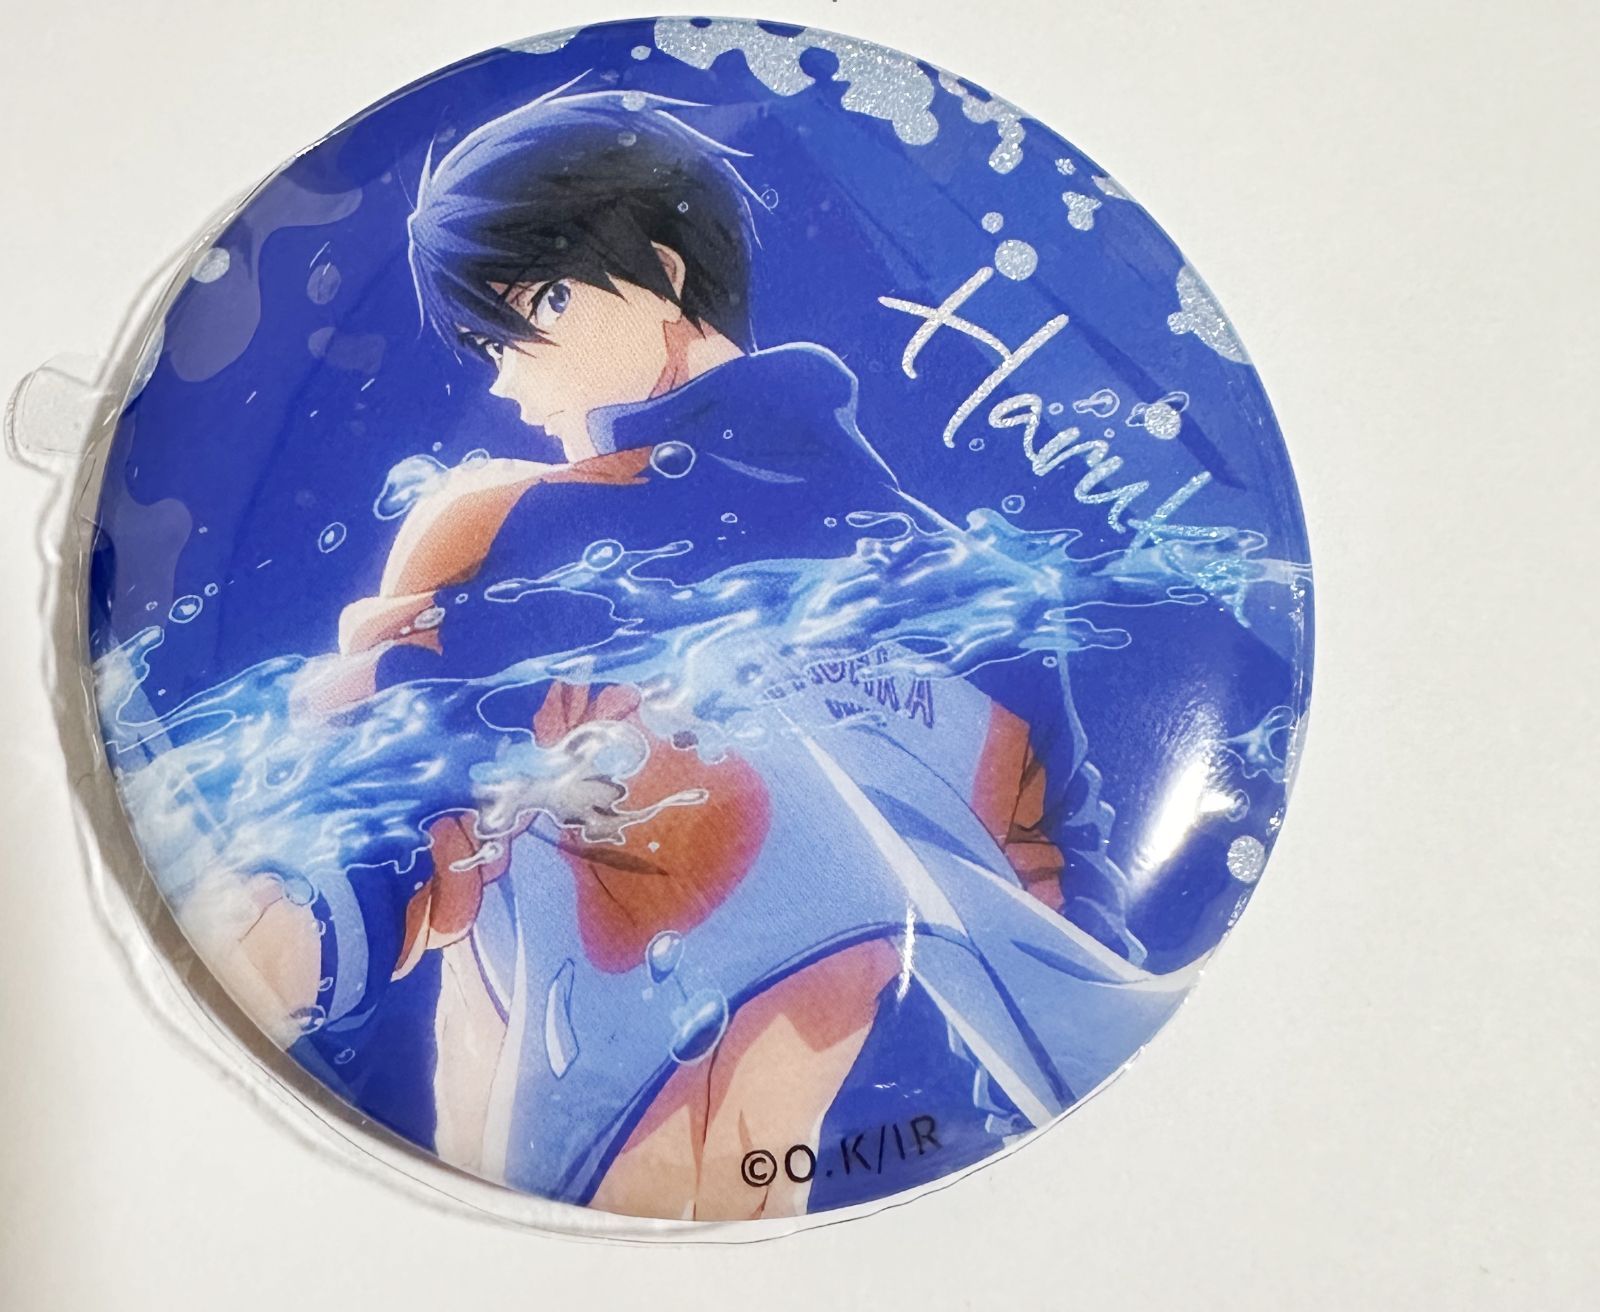 Free! 似鳥愛一郎 缶バッジ まとめ売り - キャラクターグッズ